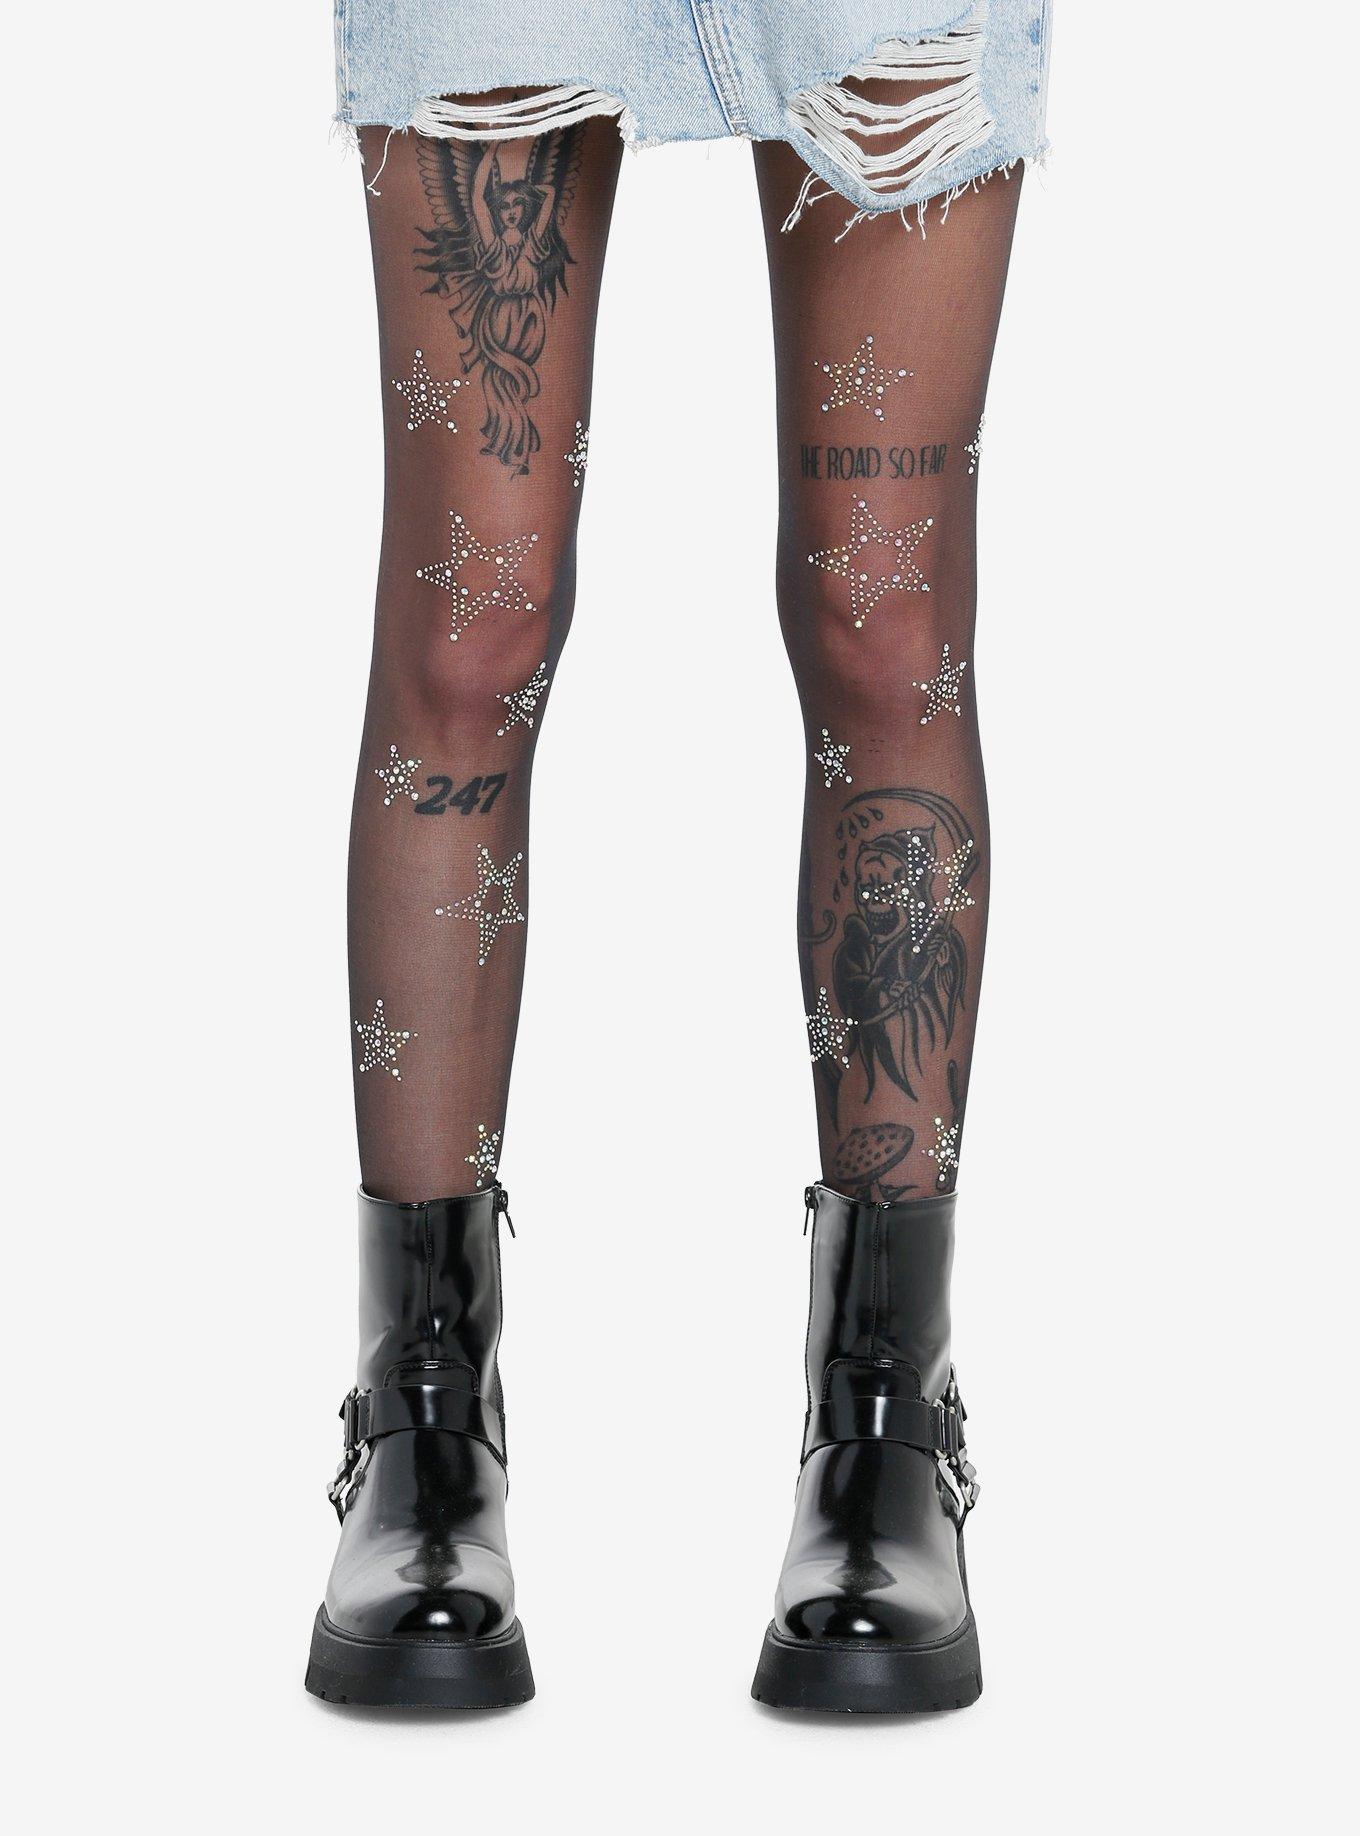 Hot Topic Shimmer Tights Black/Gold